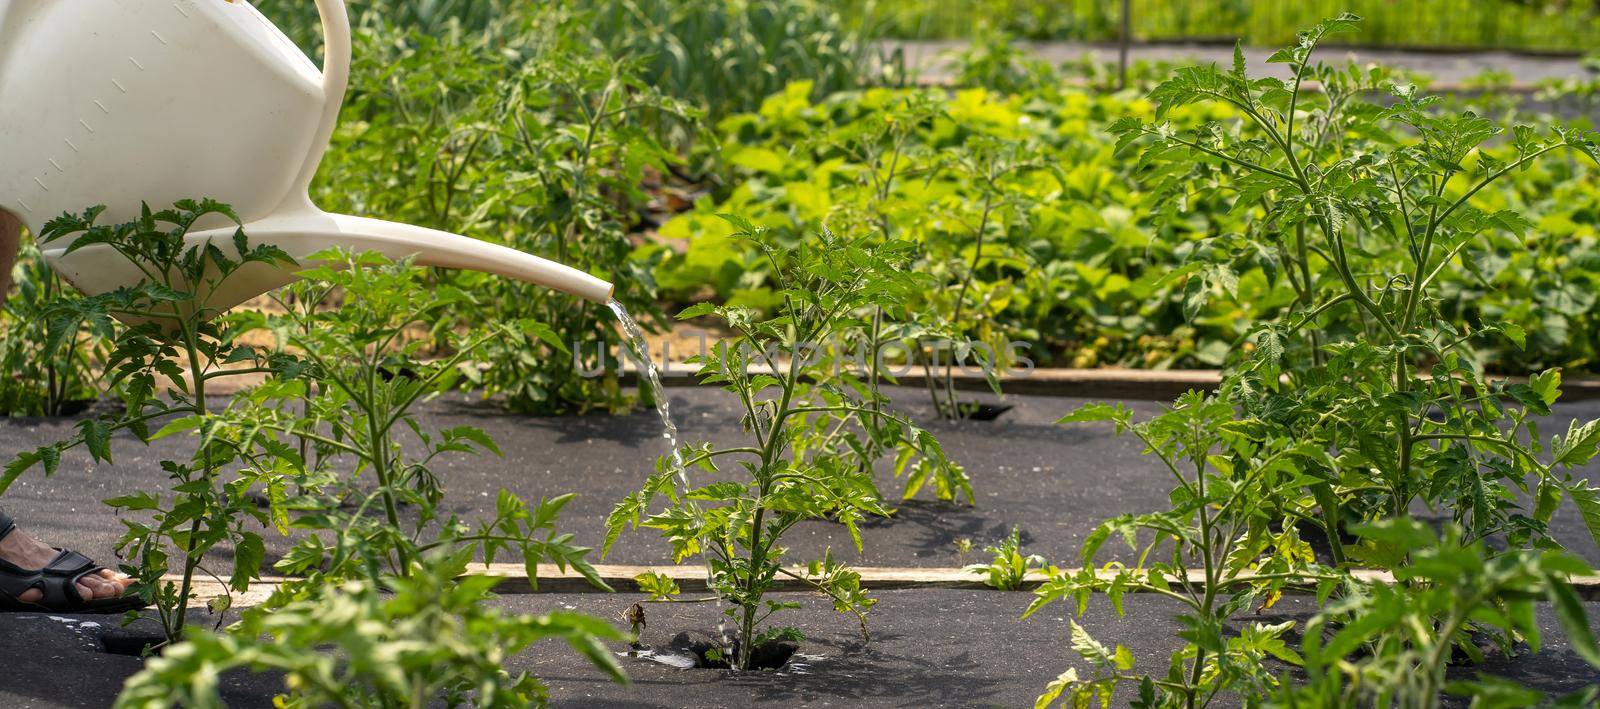 A breast with tomato plants on the ground covered with agro fiber close-up, the farmer is watering in the garden.